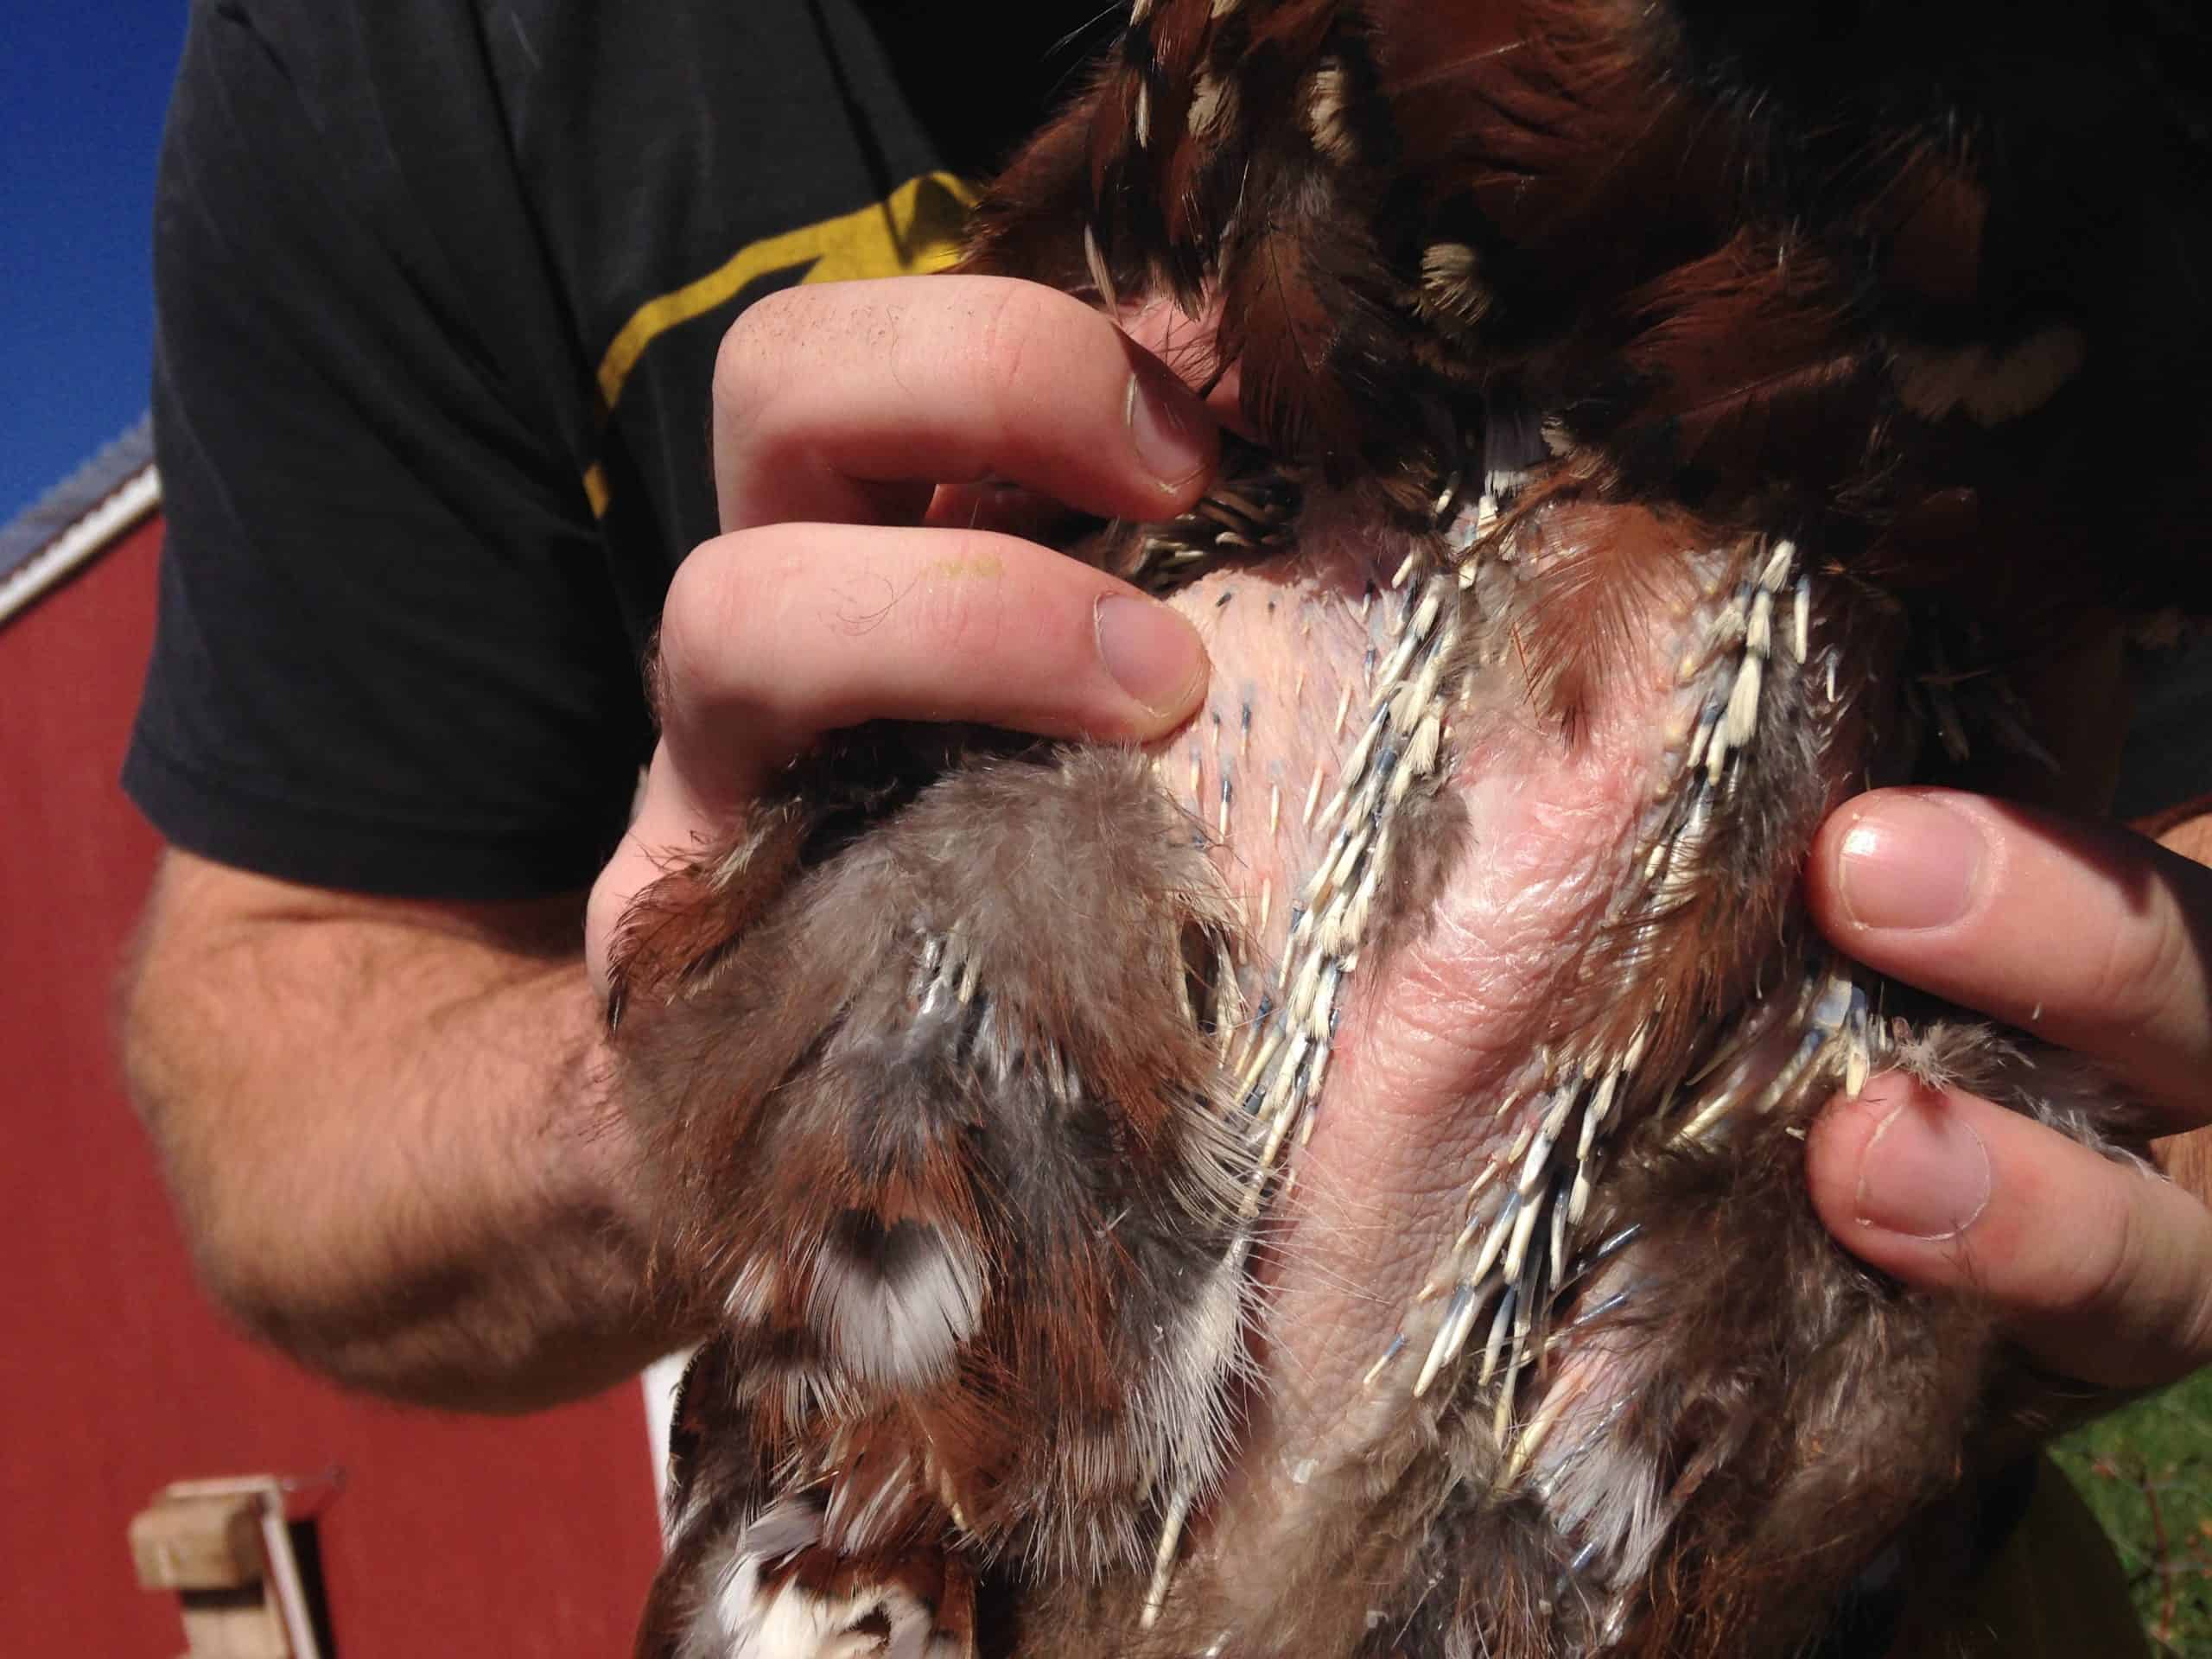 Chicken with bare chest due to losing feathers while molting.